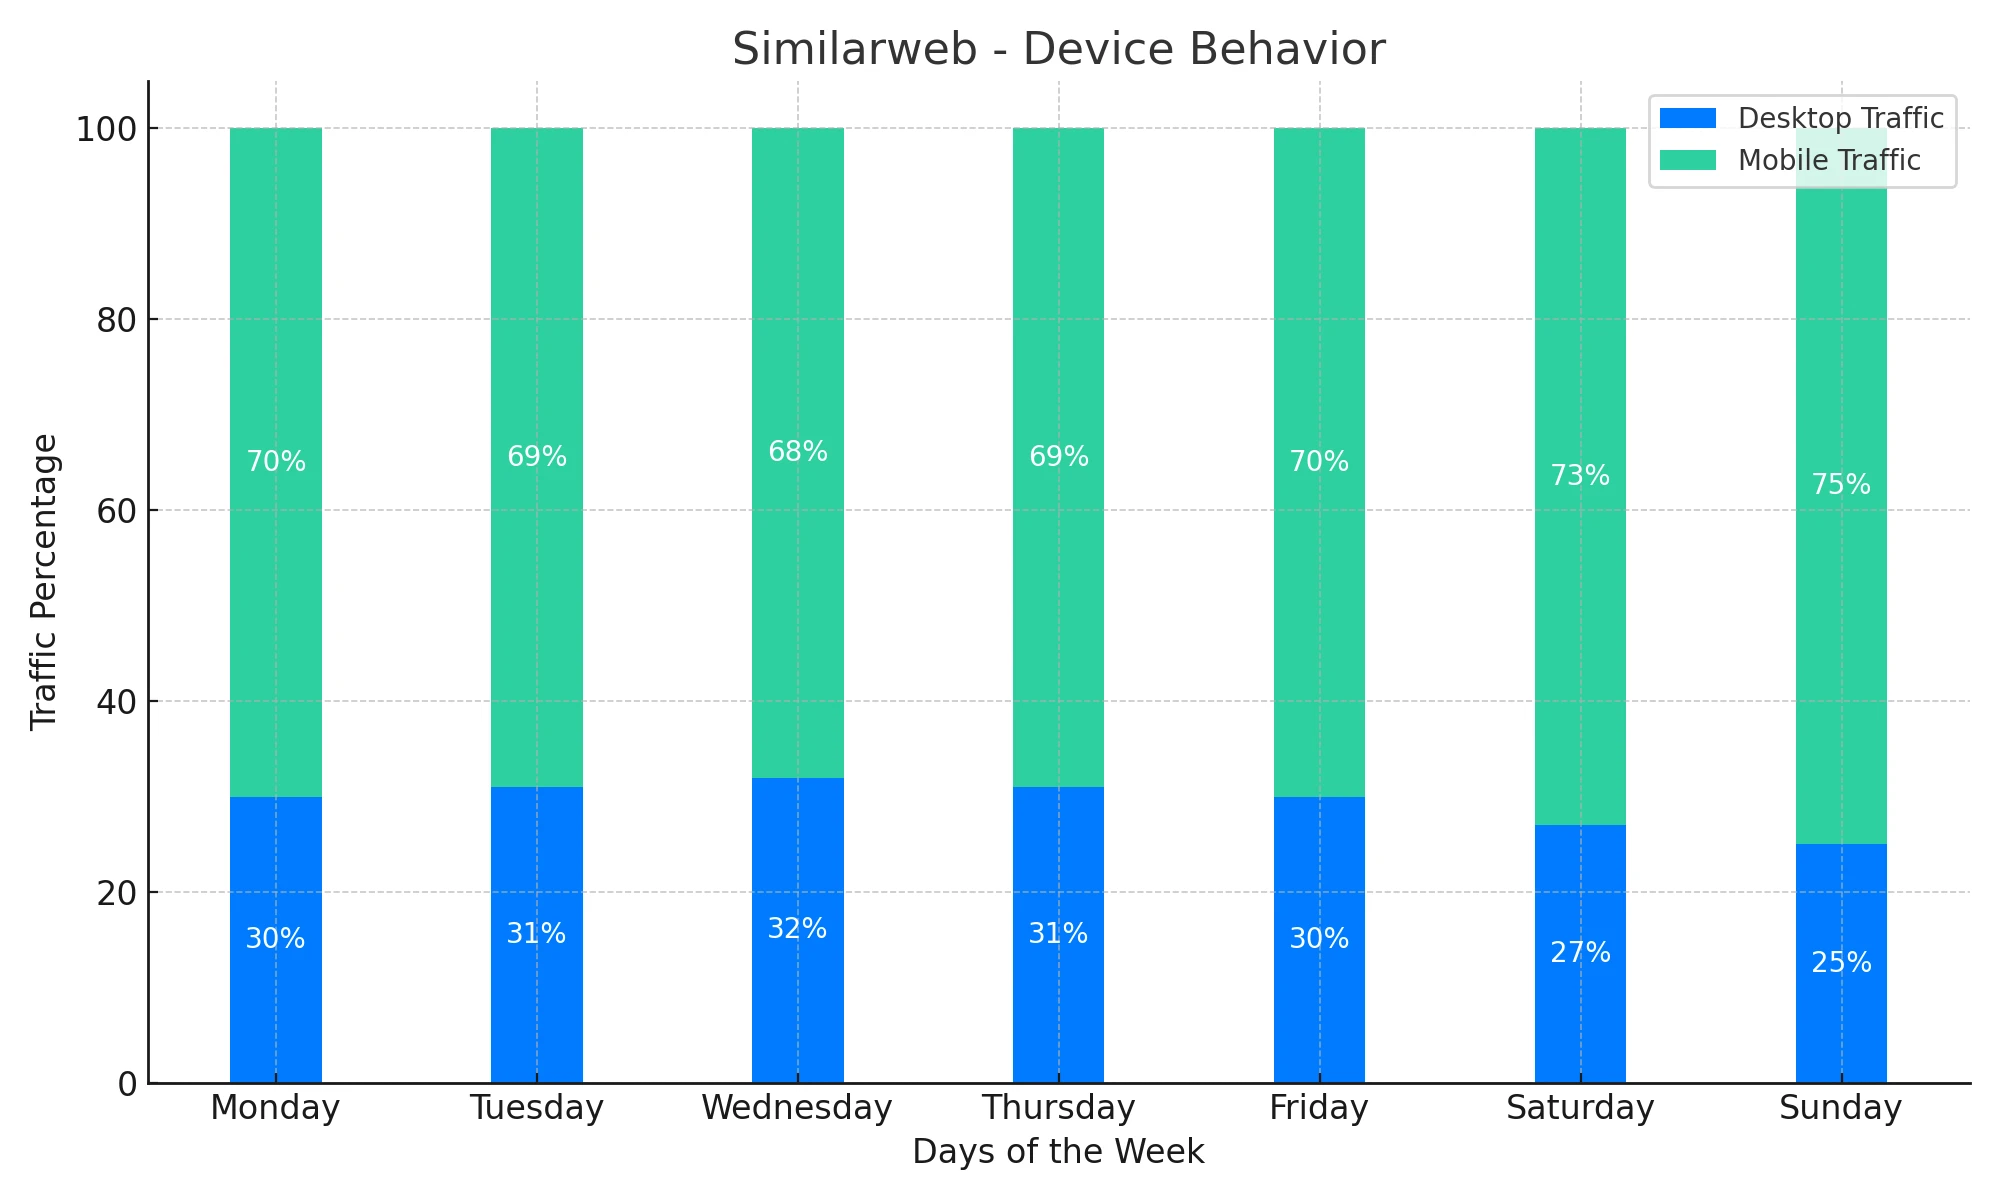 Bar chart showing the percentage of desktop and mobile traffic for each day of the week according to Similarweb data. Desktop traffic is represented in blue, and mobile traffic is in green.